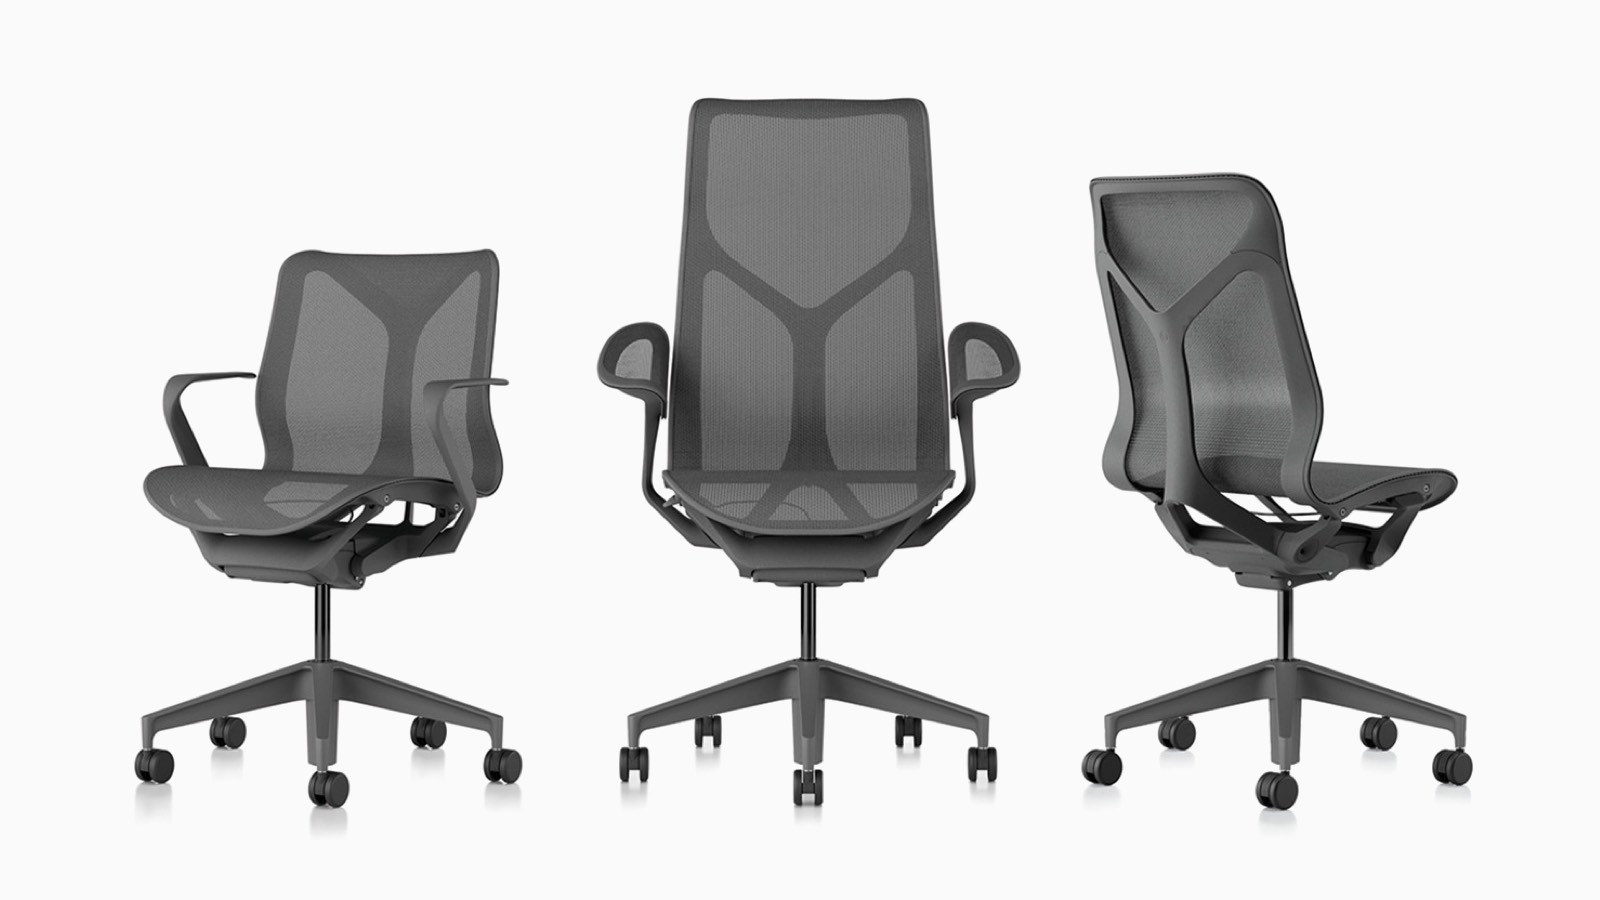 Low-back, high-back, and mid-back Cosm ergonomic desk chairs with suspension materials, bases, and frames in Carbon gray.